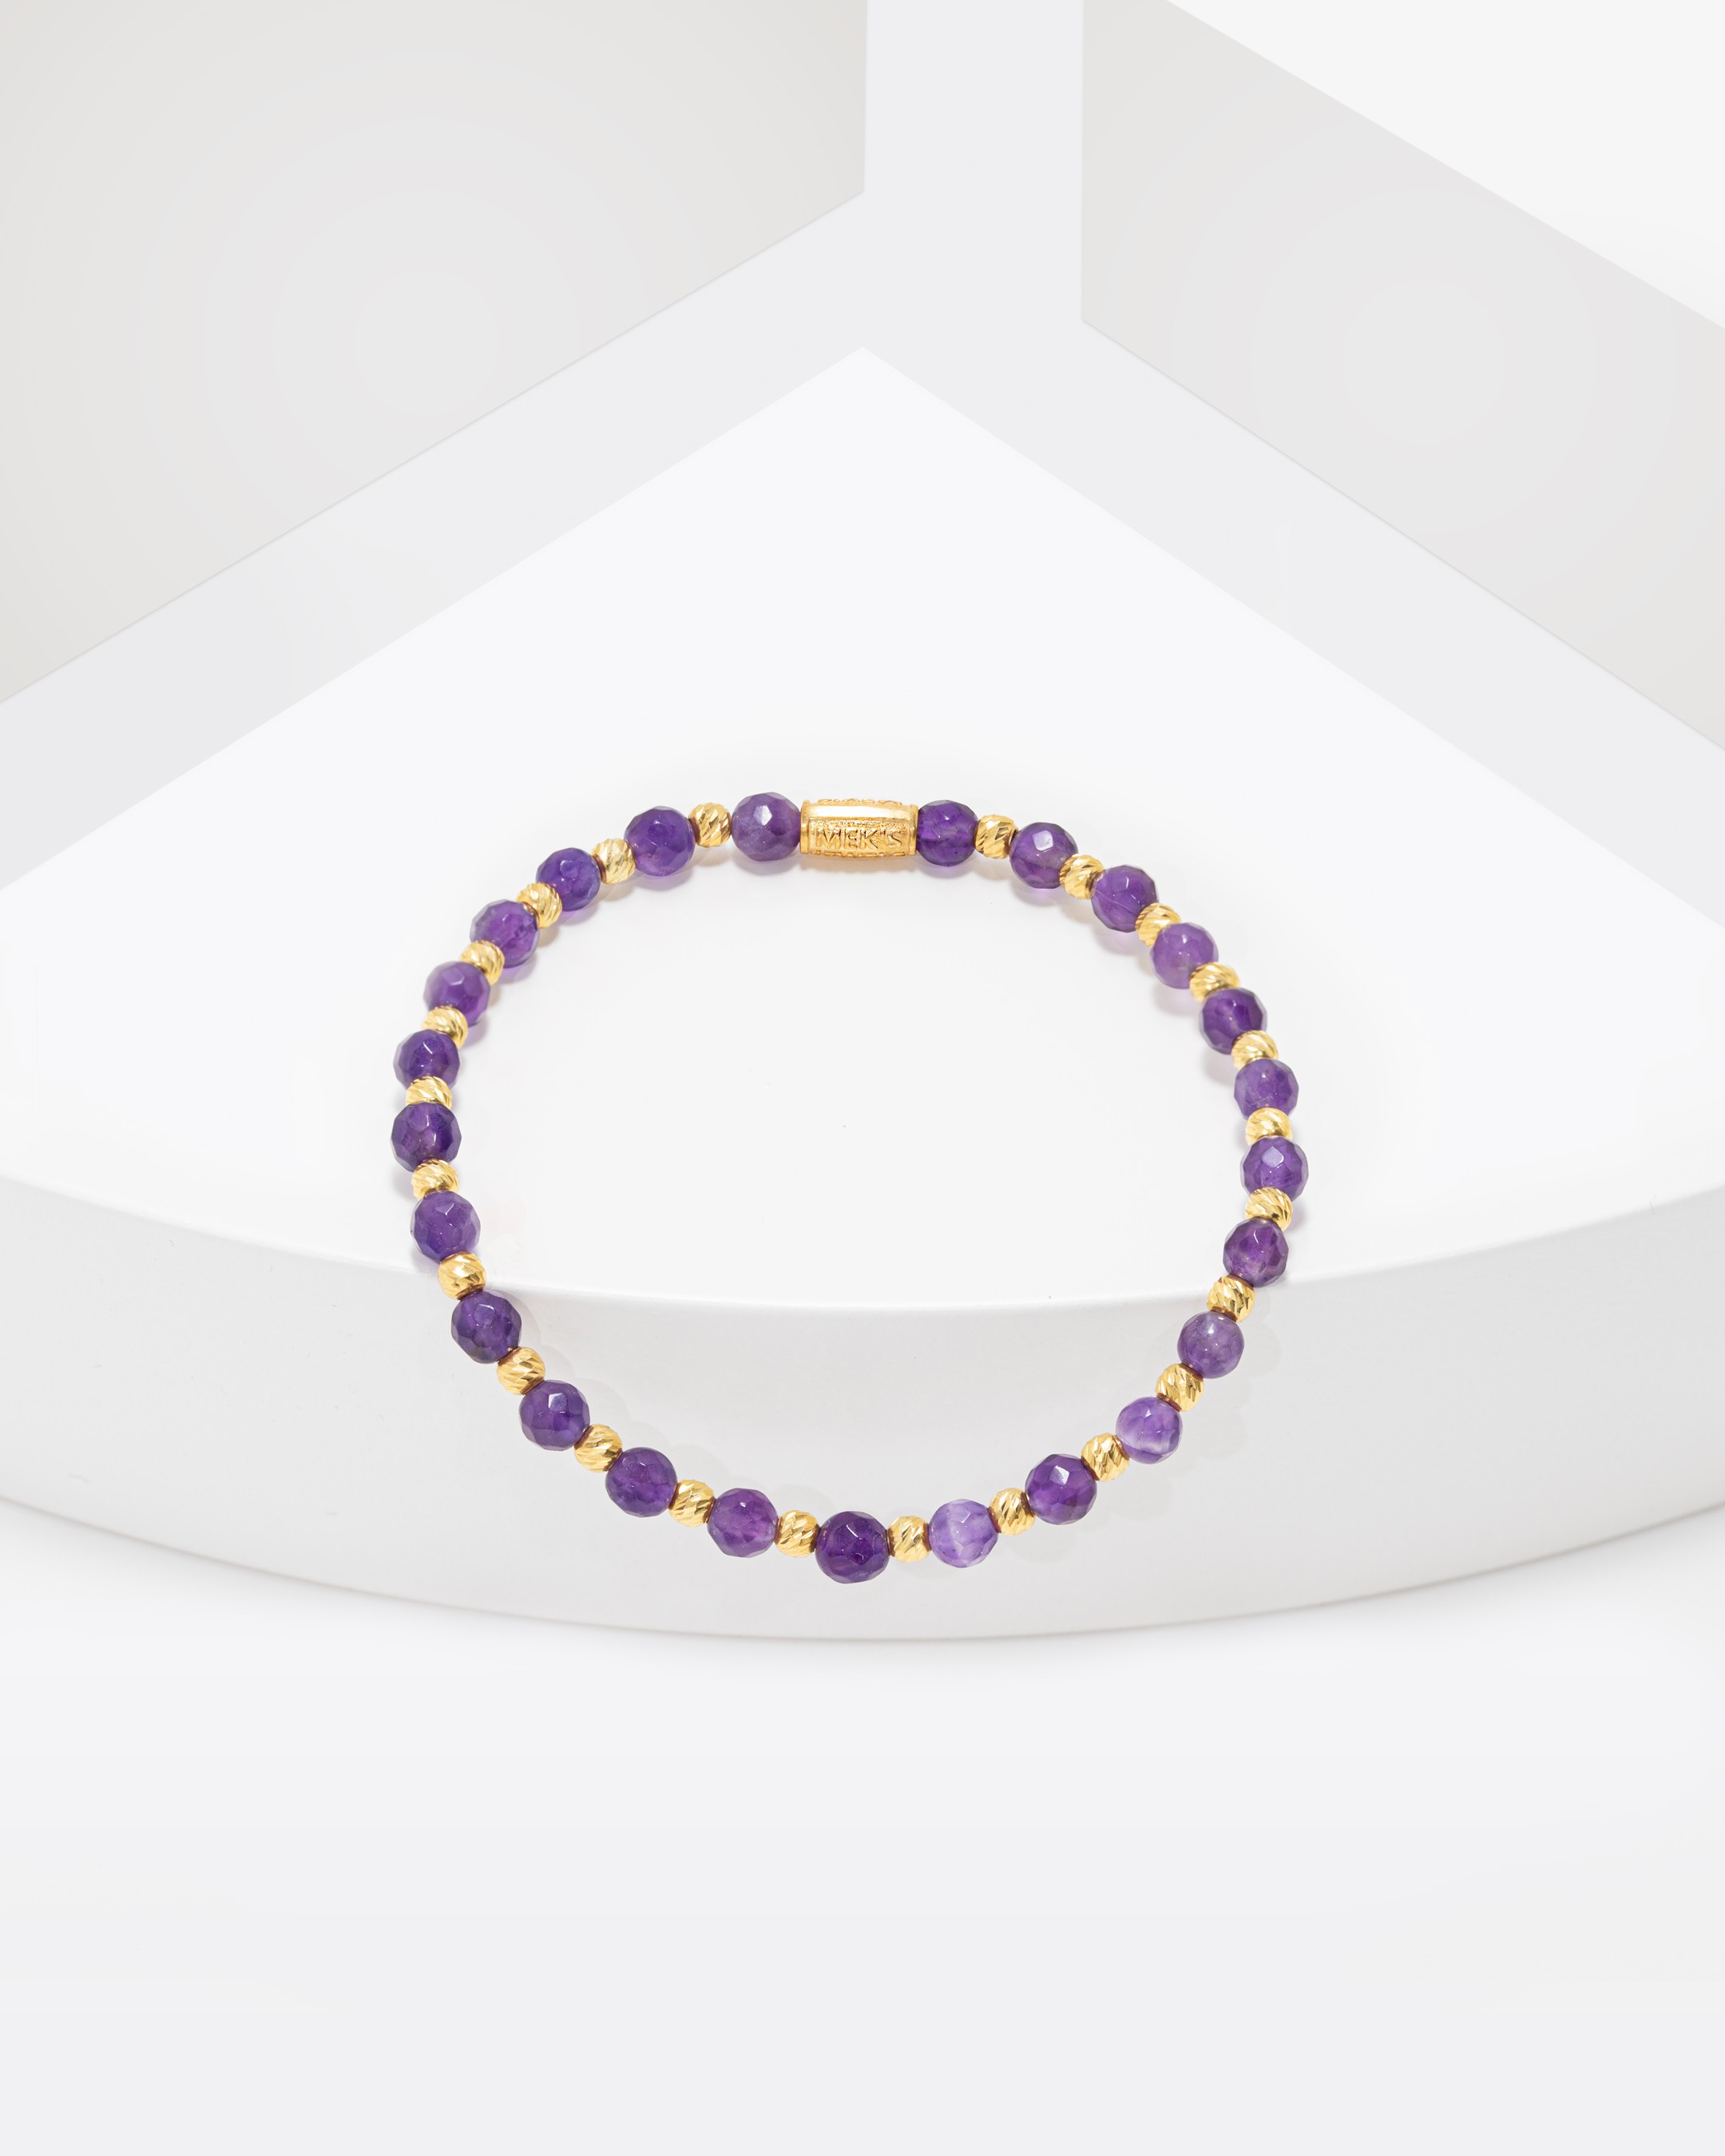 14.9 Carat Sterling Silver Bracelet with Natural Amethyst Stone - Gold